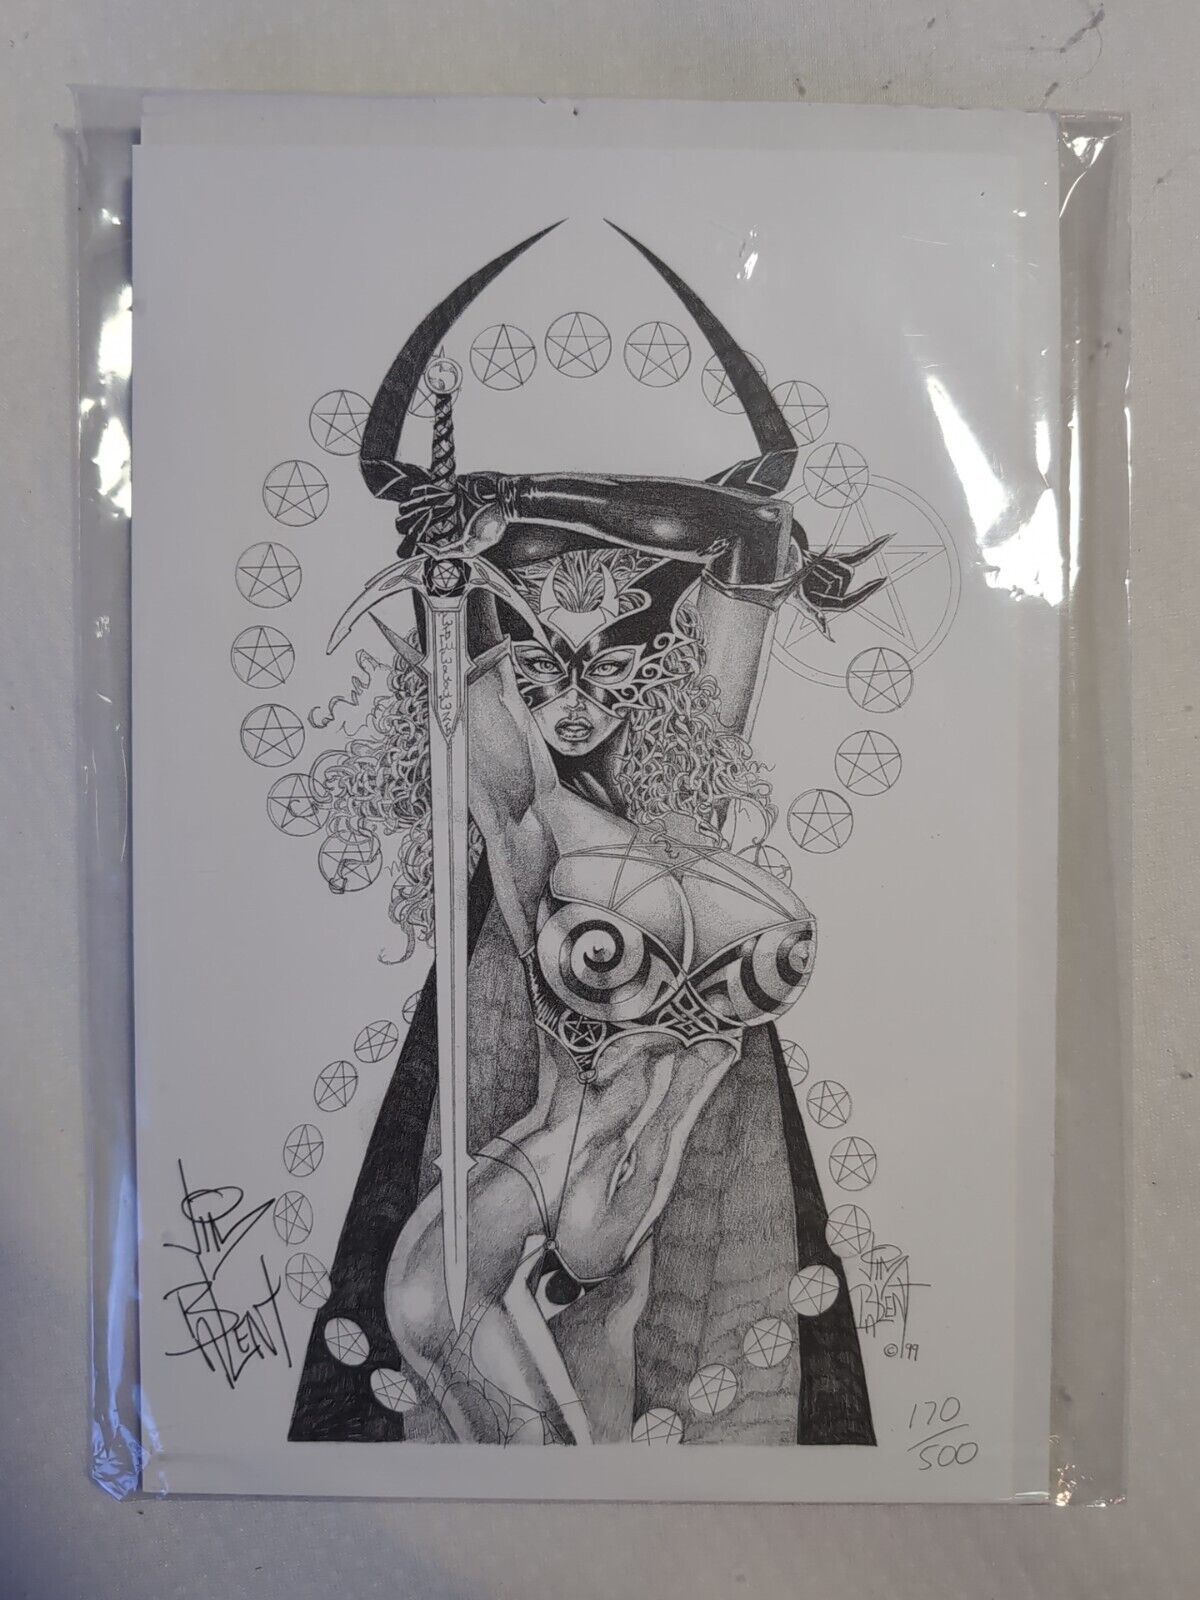 1999 JIM BALENT's - TAROT: Witch of the Black Rose Signed Lithograph LE #170/500